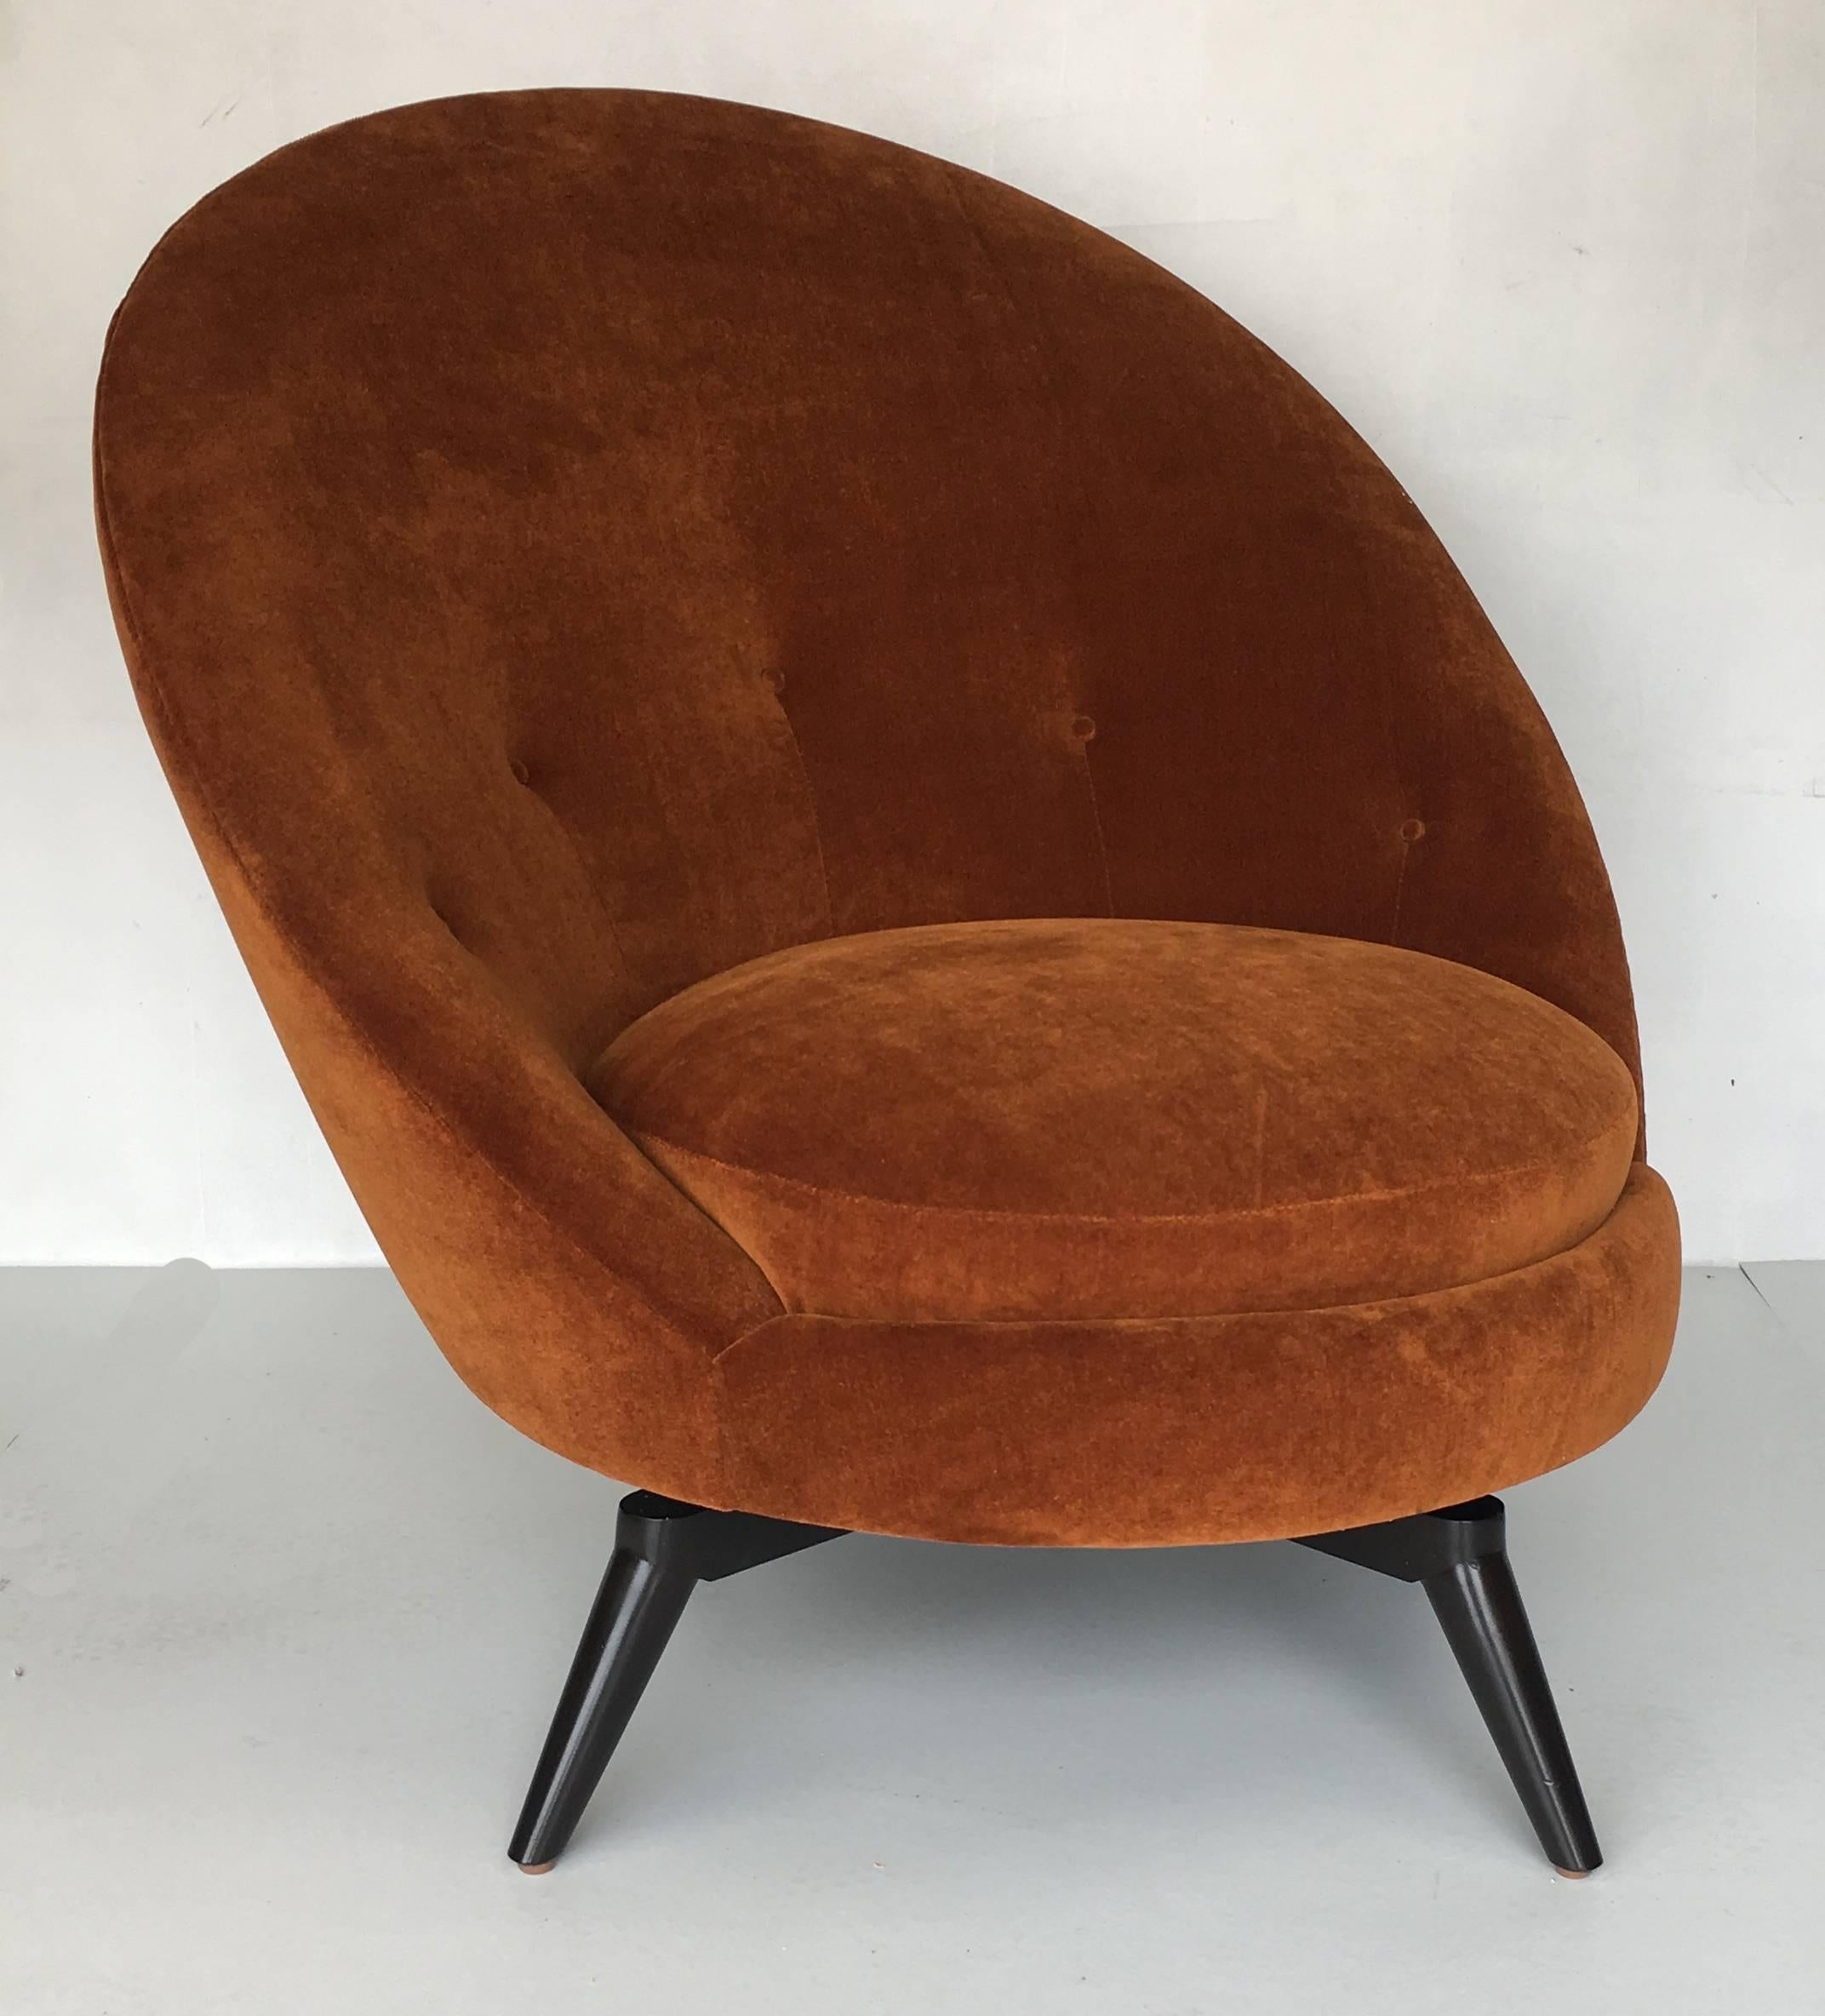 Pair of swivel egg chairs in the style of Jean Royère. The pair have been freshly upholstered in heavy-weight, backed burnt orange or rust mohair velvet. These super stylish and versatile chairs go with pretty much anything and are as comfortable as